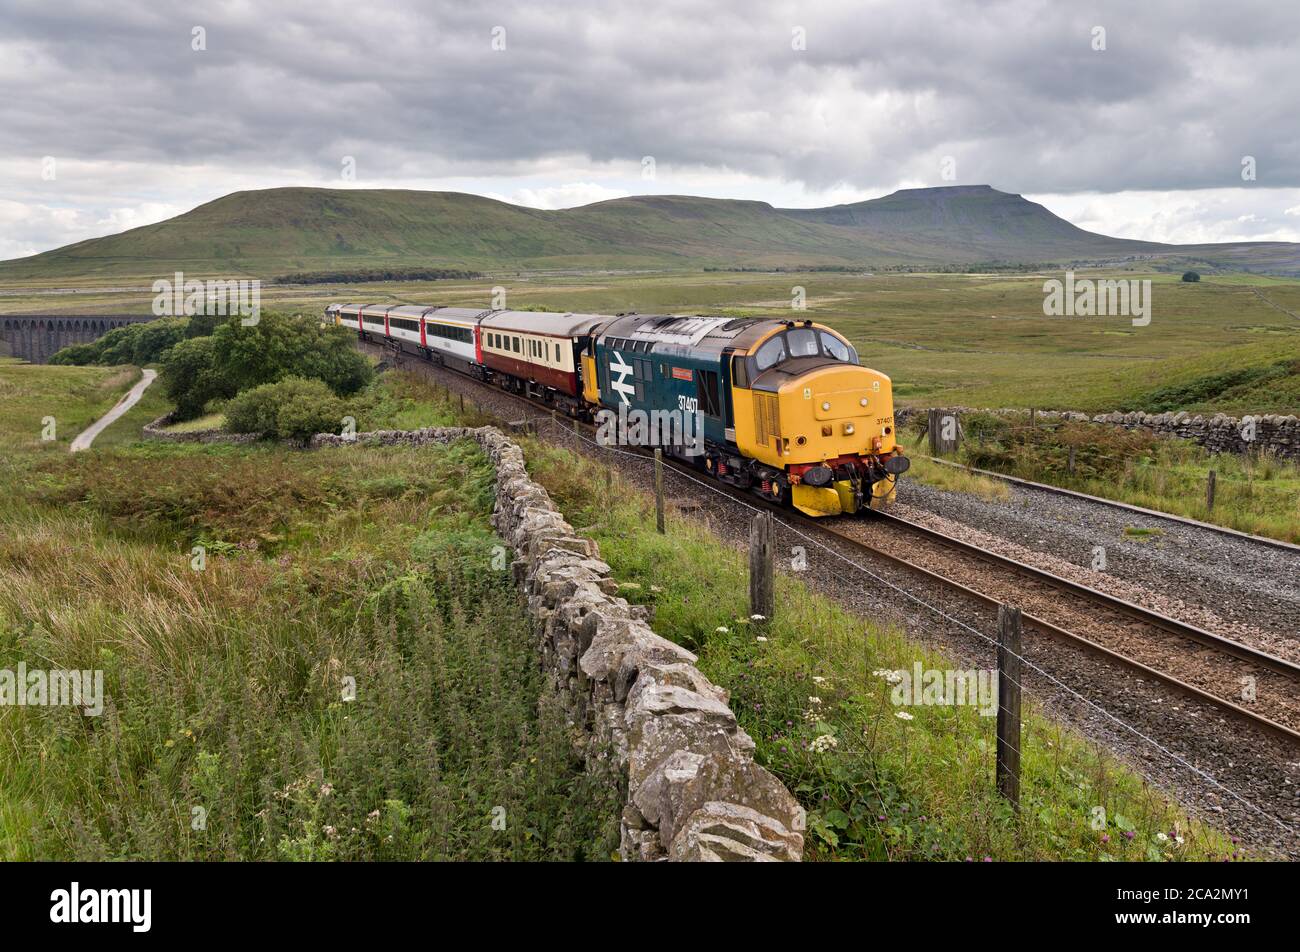 'The Staycation Express' Summer special train on the Settle-Carlisle railway, seen here at Blea Moor, Ribblehead, Yorkshire Dales National Park, UK Stock Photo